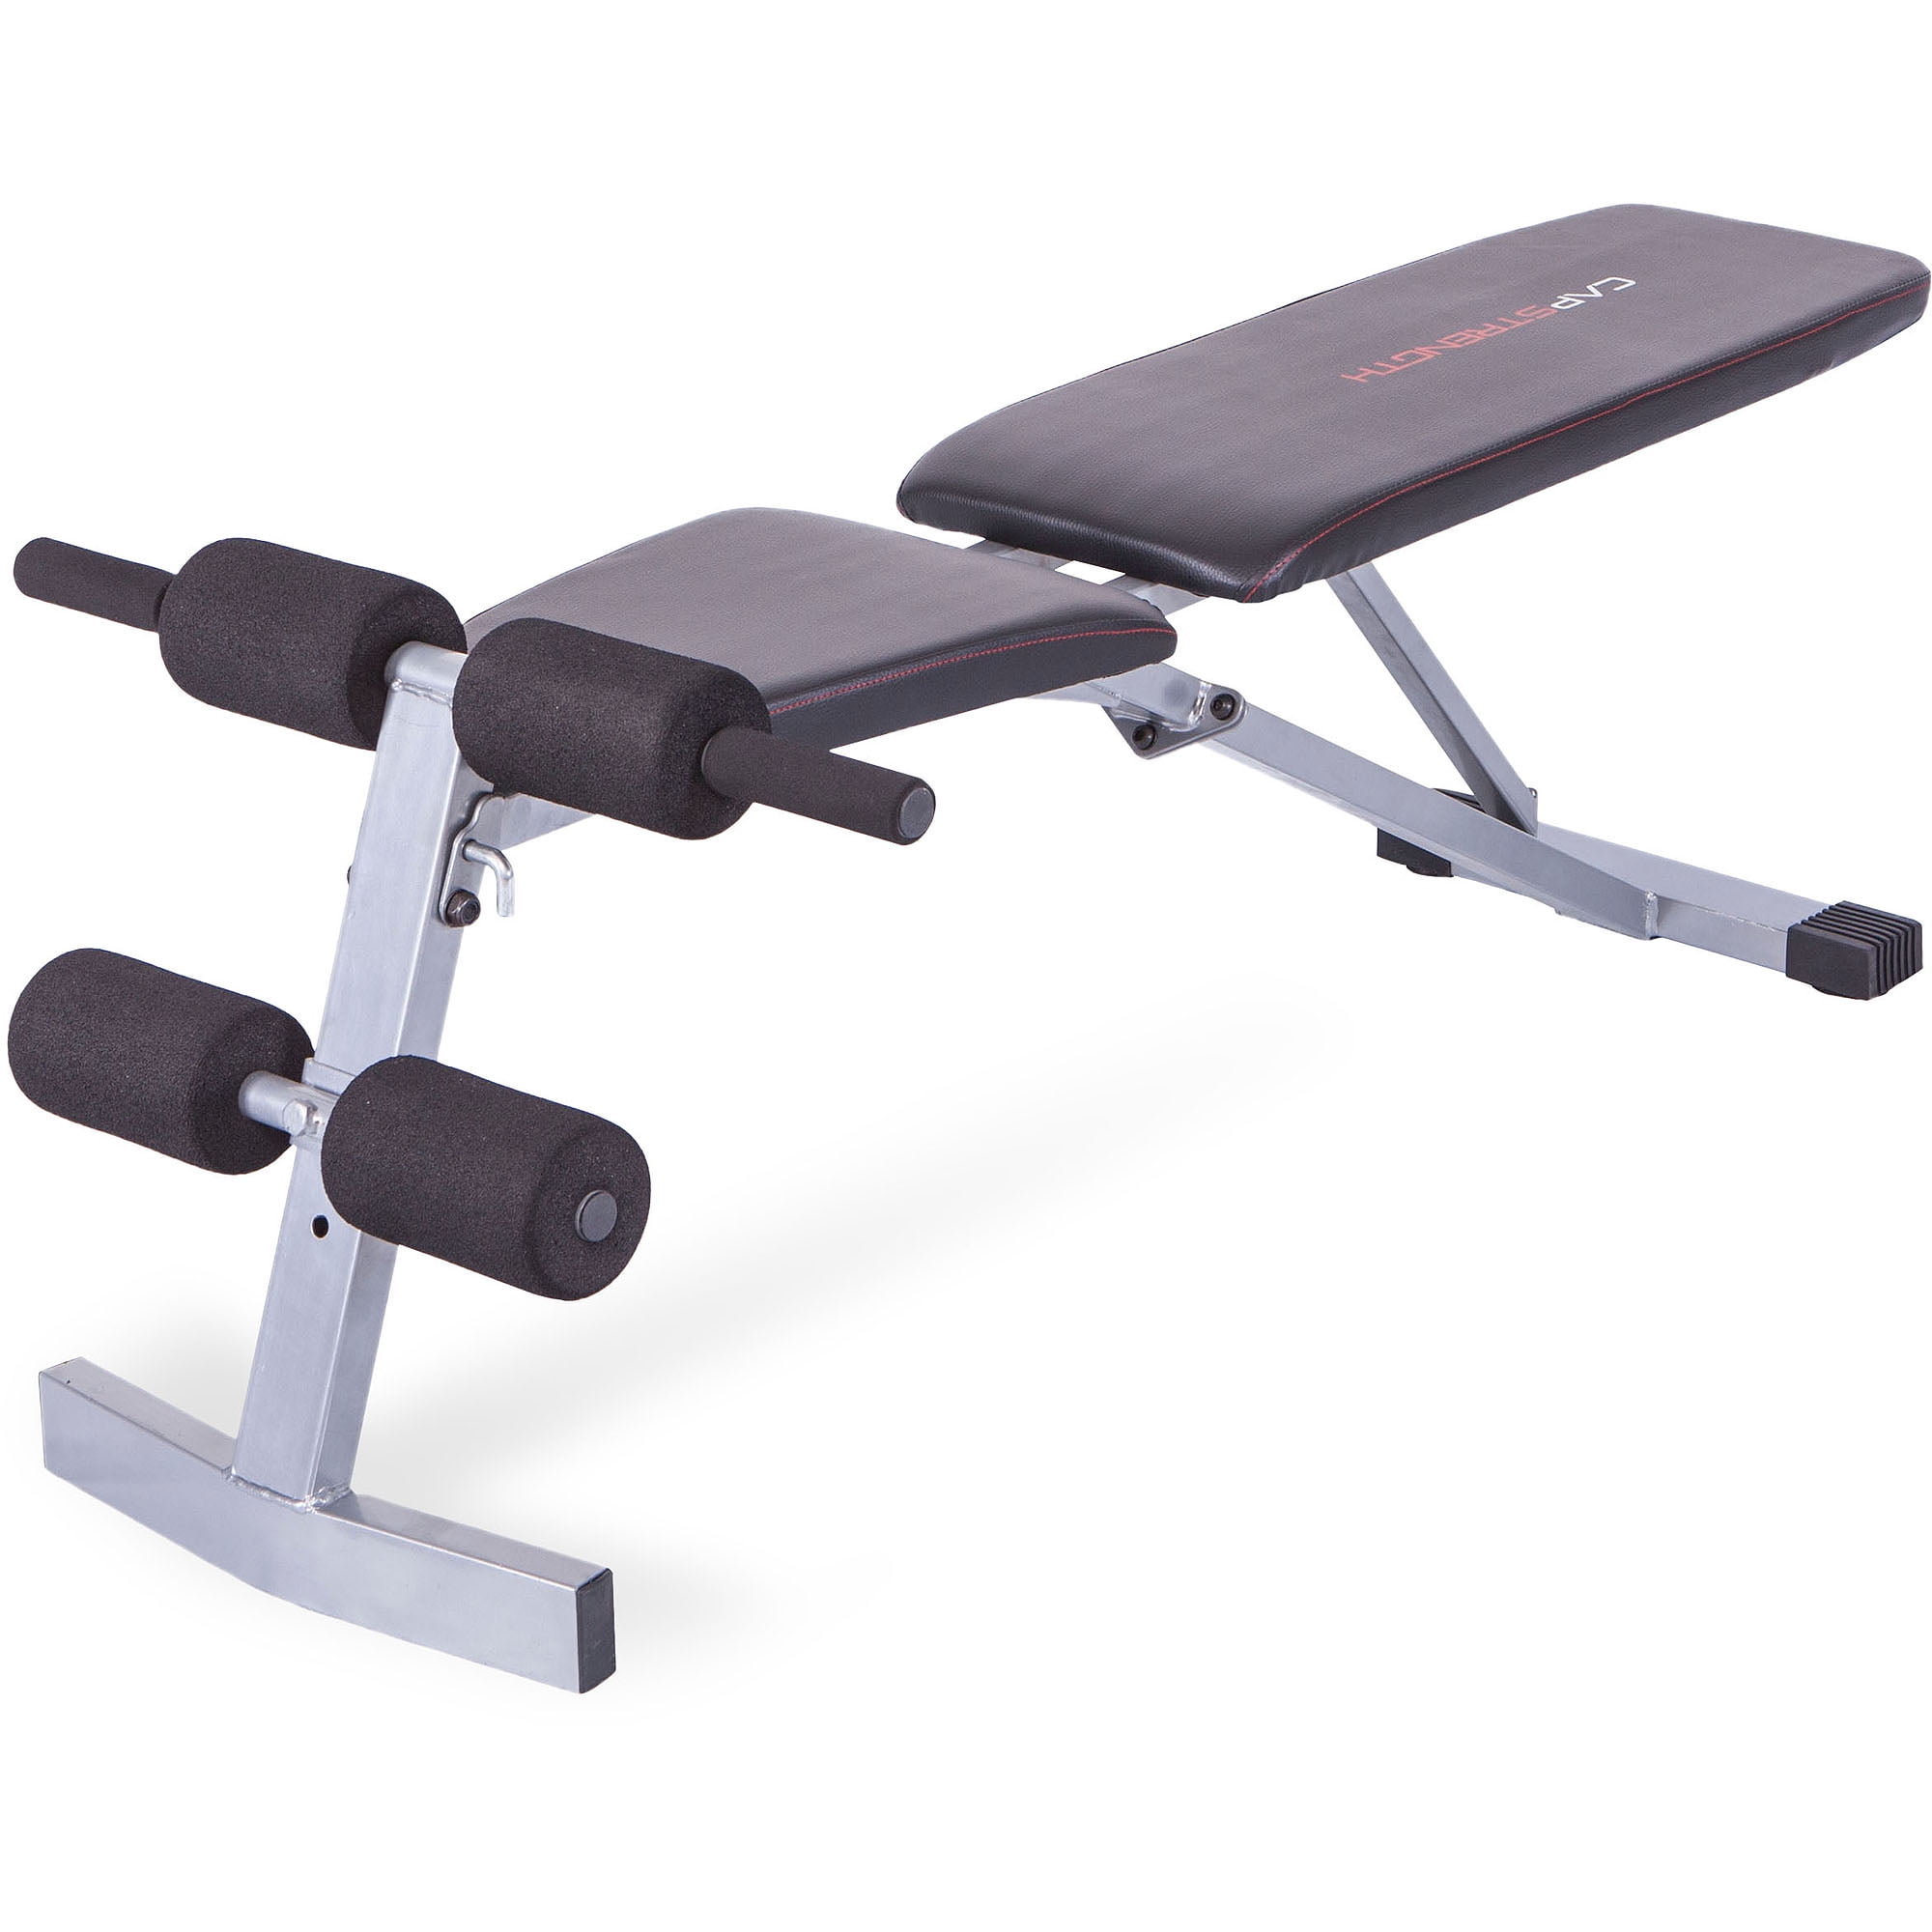 Cap Strength Fid Bench Ideal For Dumbbell And Abdominal Exercises Strength Training Equipment Silverknowesgc Benches